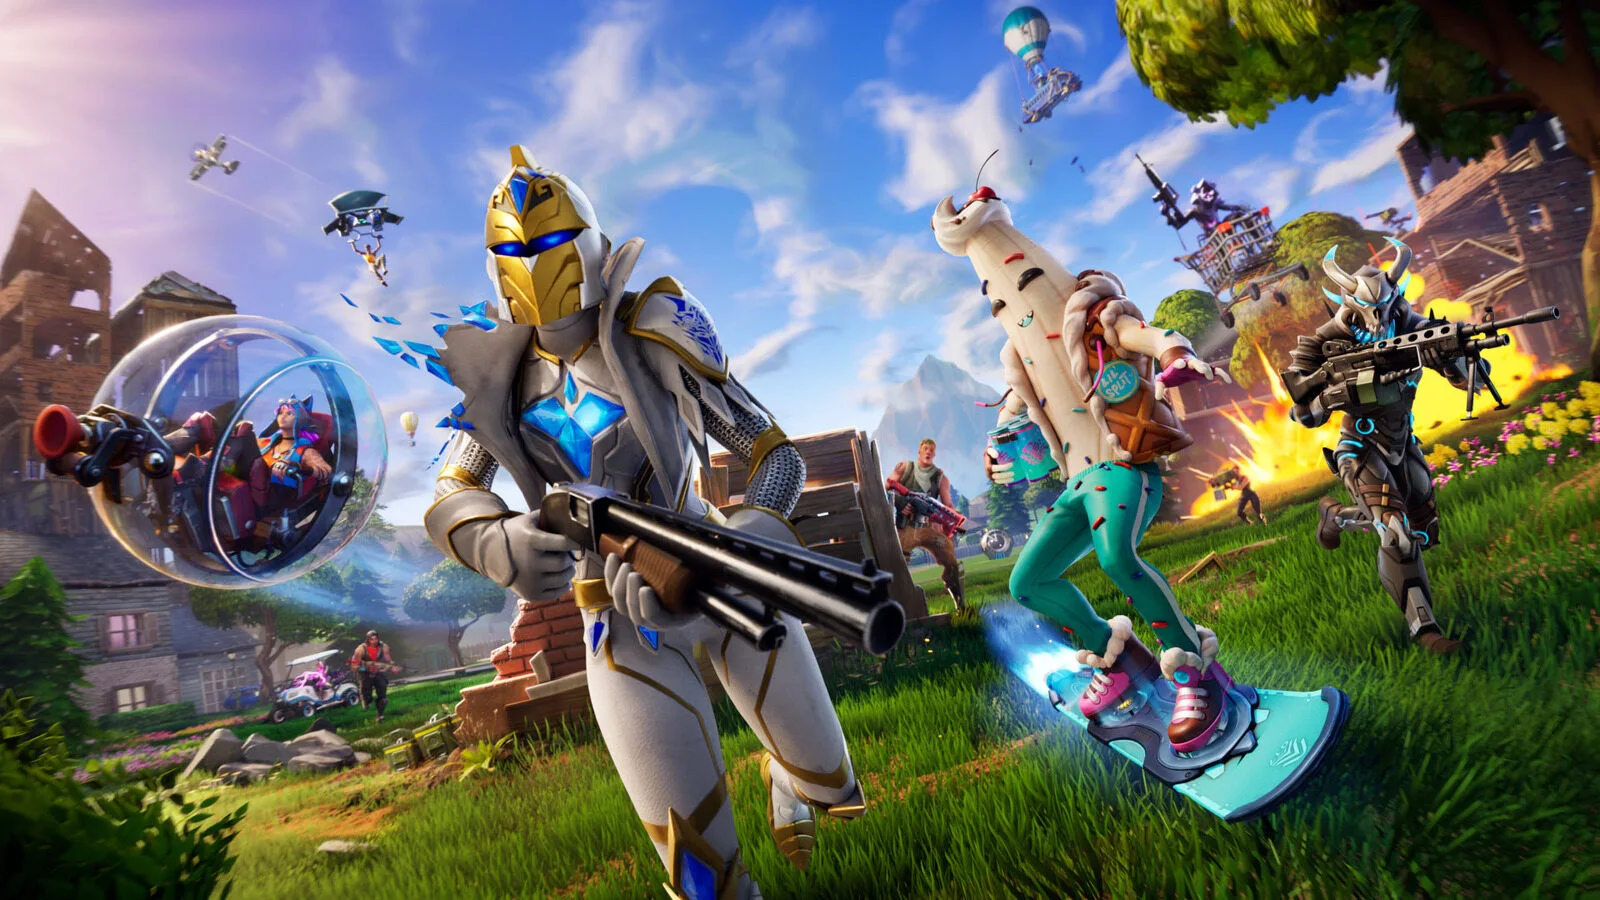 Fortnite disables Split screen, 'Ready Up' and 'Keep Playing Together' until further notice